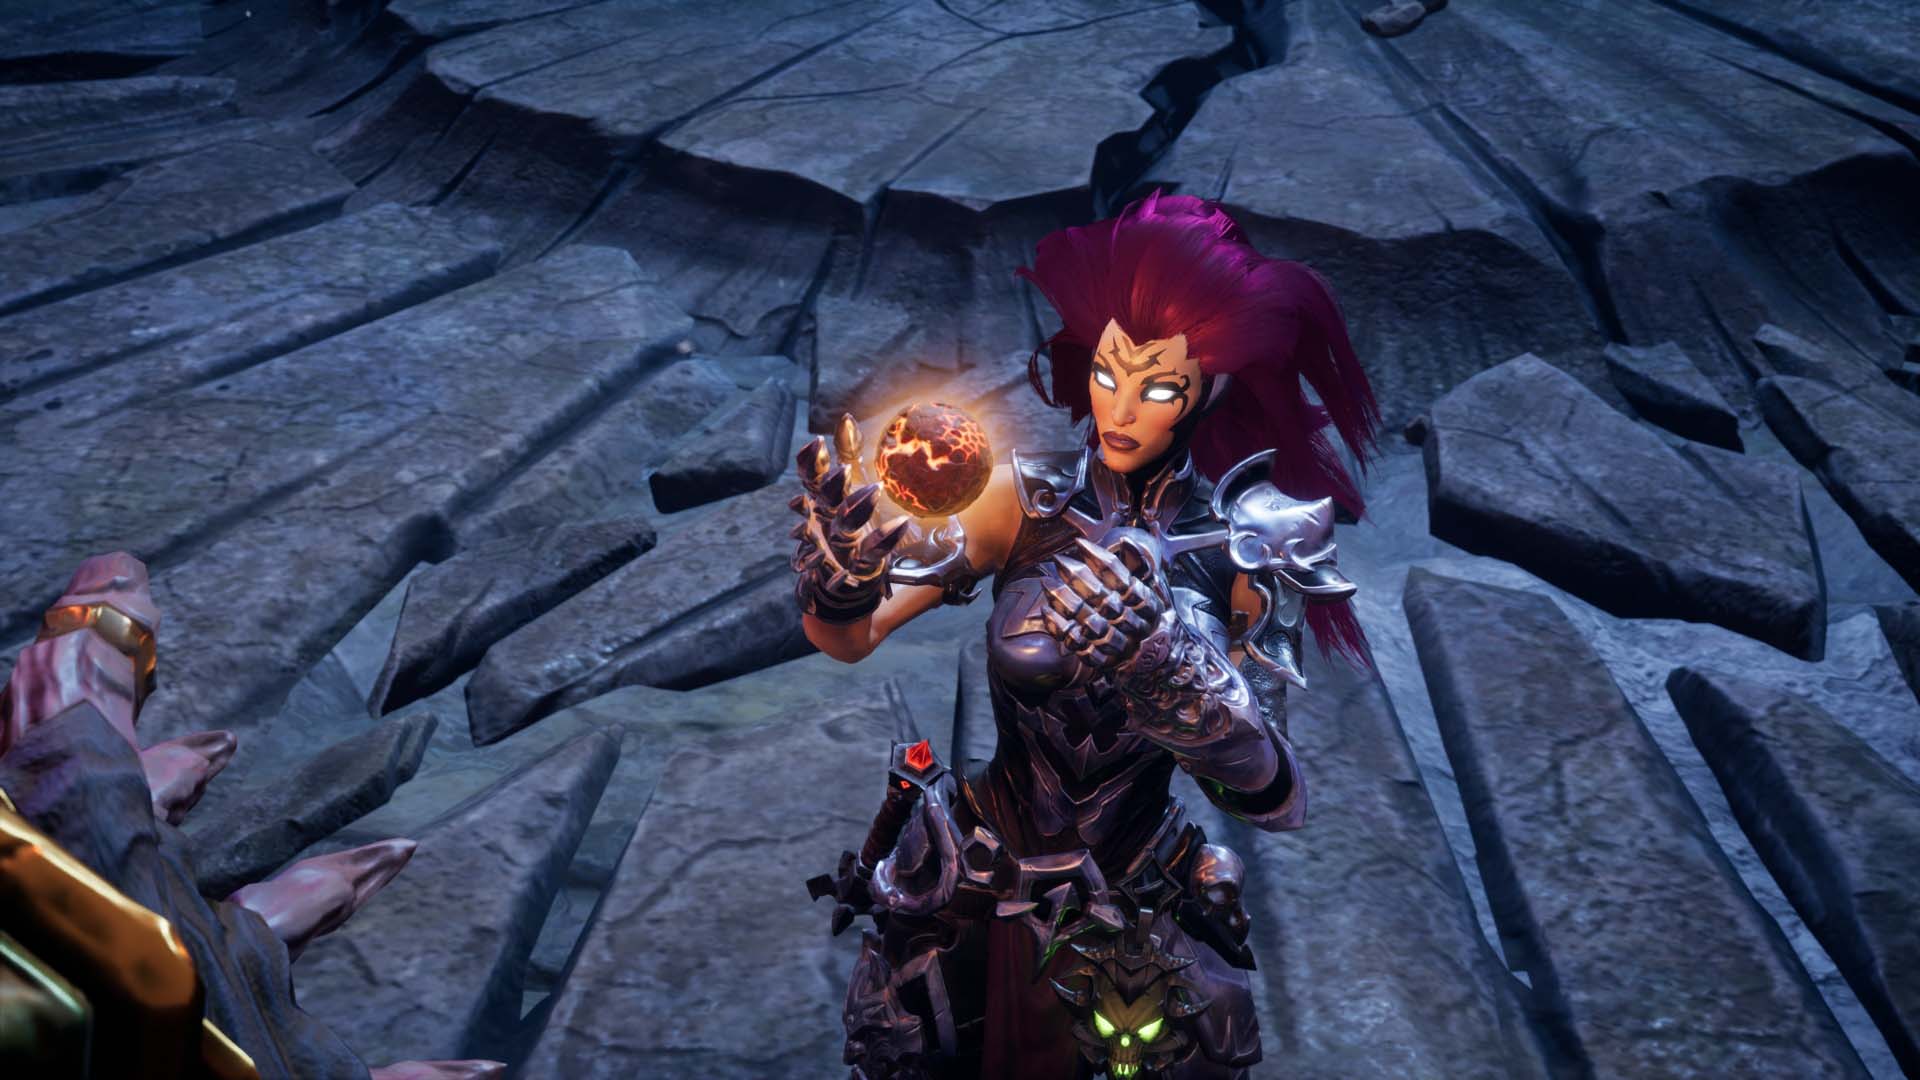 Darksiders III – First Hands-on Preview